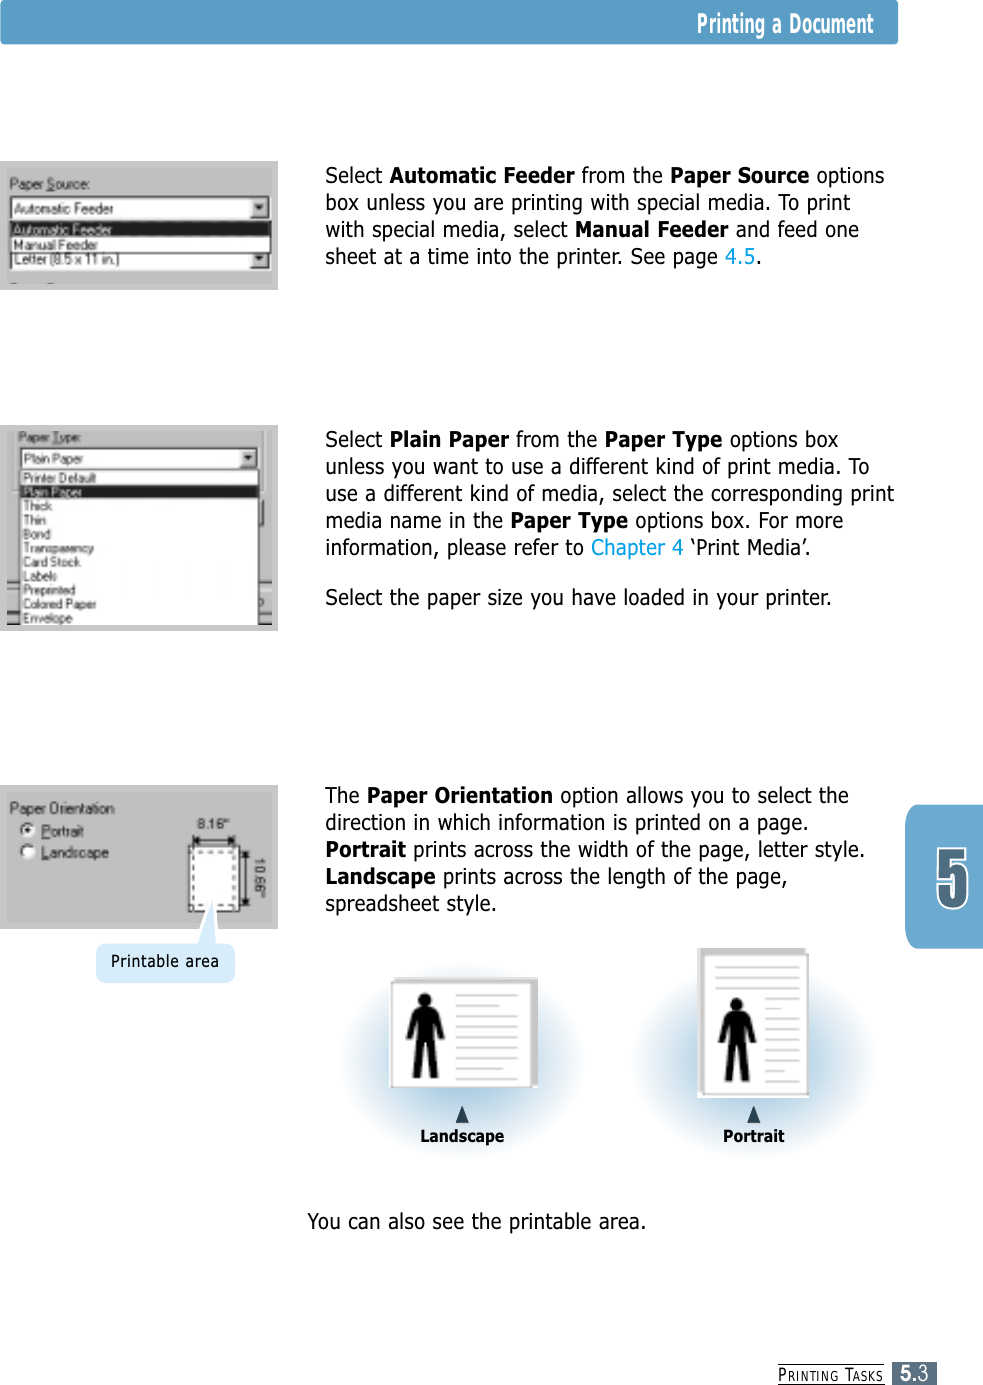 PRINTING TASKS5.3Printing a Document4Select Automatic Feeder from the Paper Source optionsbox unless you are printing with special media. To printwith special media, select Manual Feeder and feed onesheet at a time into the printer. See page 4.5.4Select Plain Paper from the Paper Type options boxunless you want to use a different kind of print media. Touse a different kind of media, select the corresponding printmedia name in the Paper Type options box. For moreinformation, please refer to Chapter 4 ‘Print Media’.  4Select the paper size you have loaded in your printer.4You can also see the printable area.4The Paper Orientation option allows you to select thedirection in which information is printed on a page.Portrait prints across the width of the page, letter style.Landscape prints across the length of the page,spreadsheet style.LandscapePortraitPrintable area